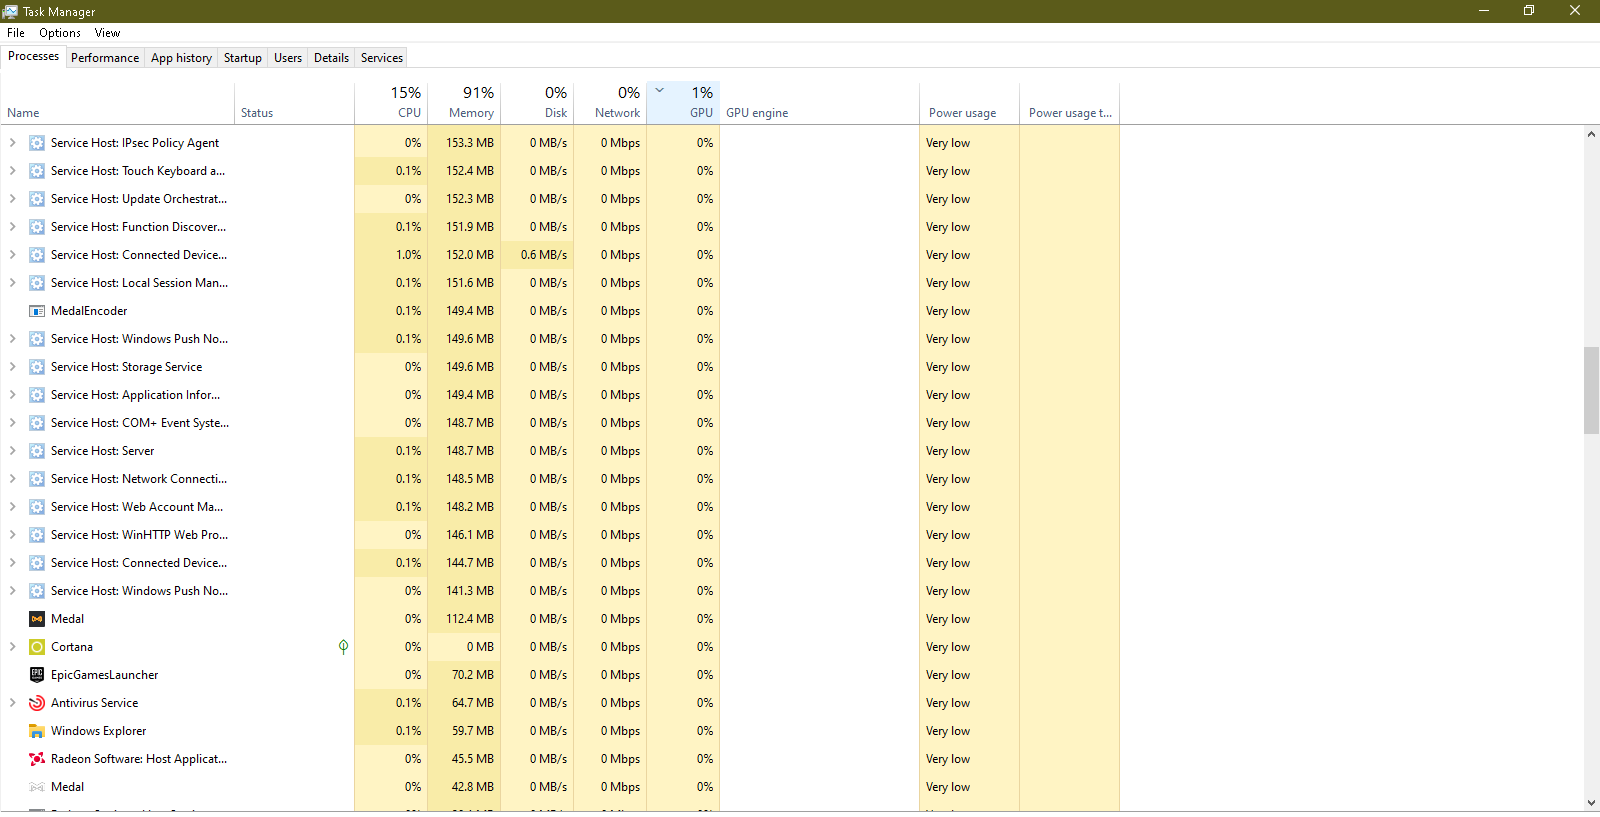 WINDOWS SERVICES USING UP ALL OF MY RAM a6aa26c6-6b77-4917-839b-bc76fac075fb?upload=true.png